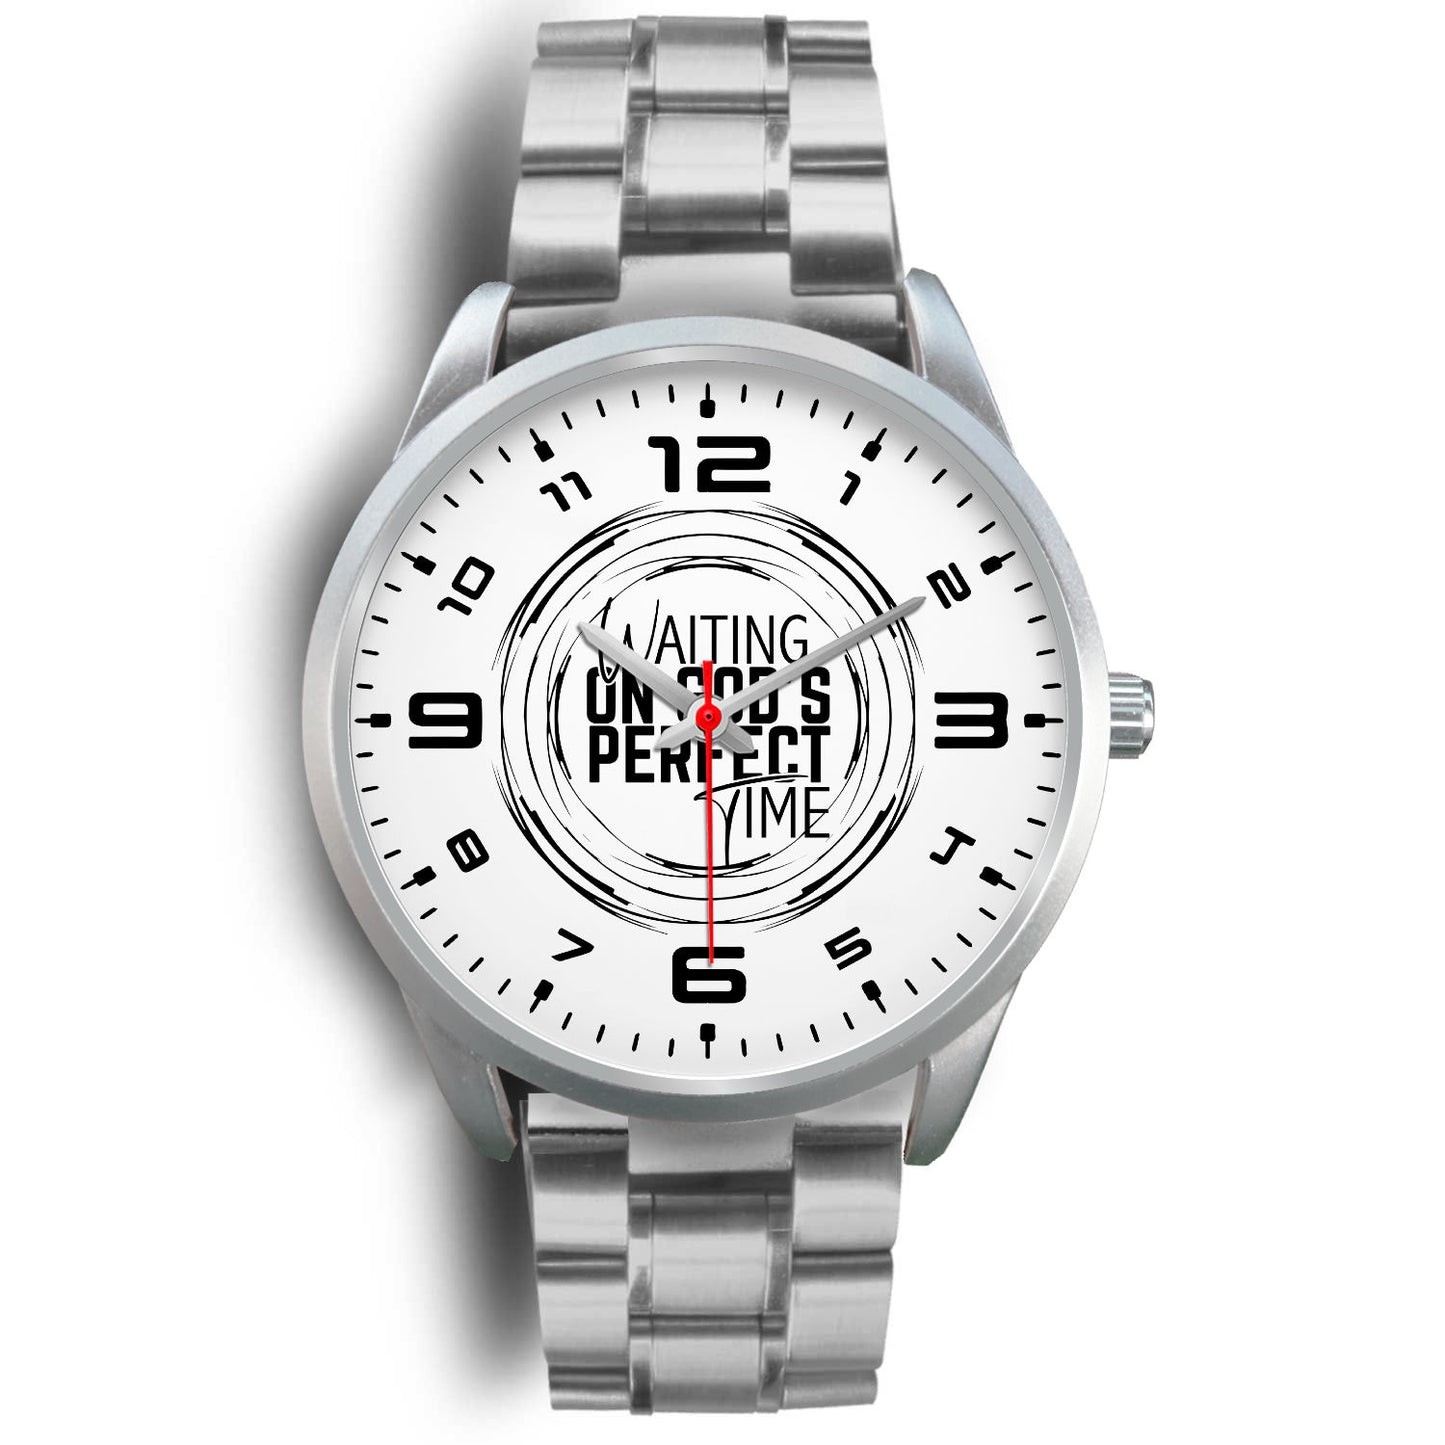 Waiting on God's Perfect Time Silver Watch Band Options-Silver Watch-Digital Rawness